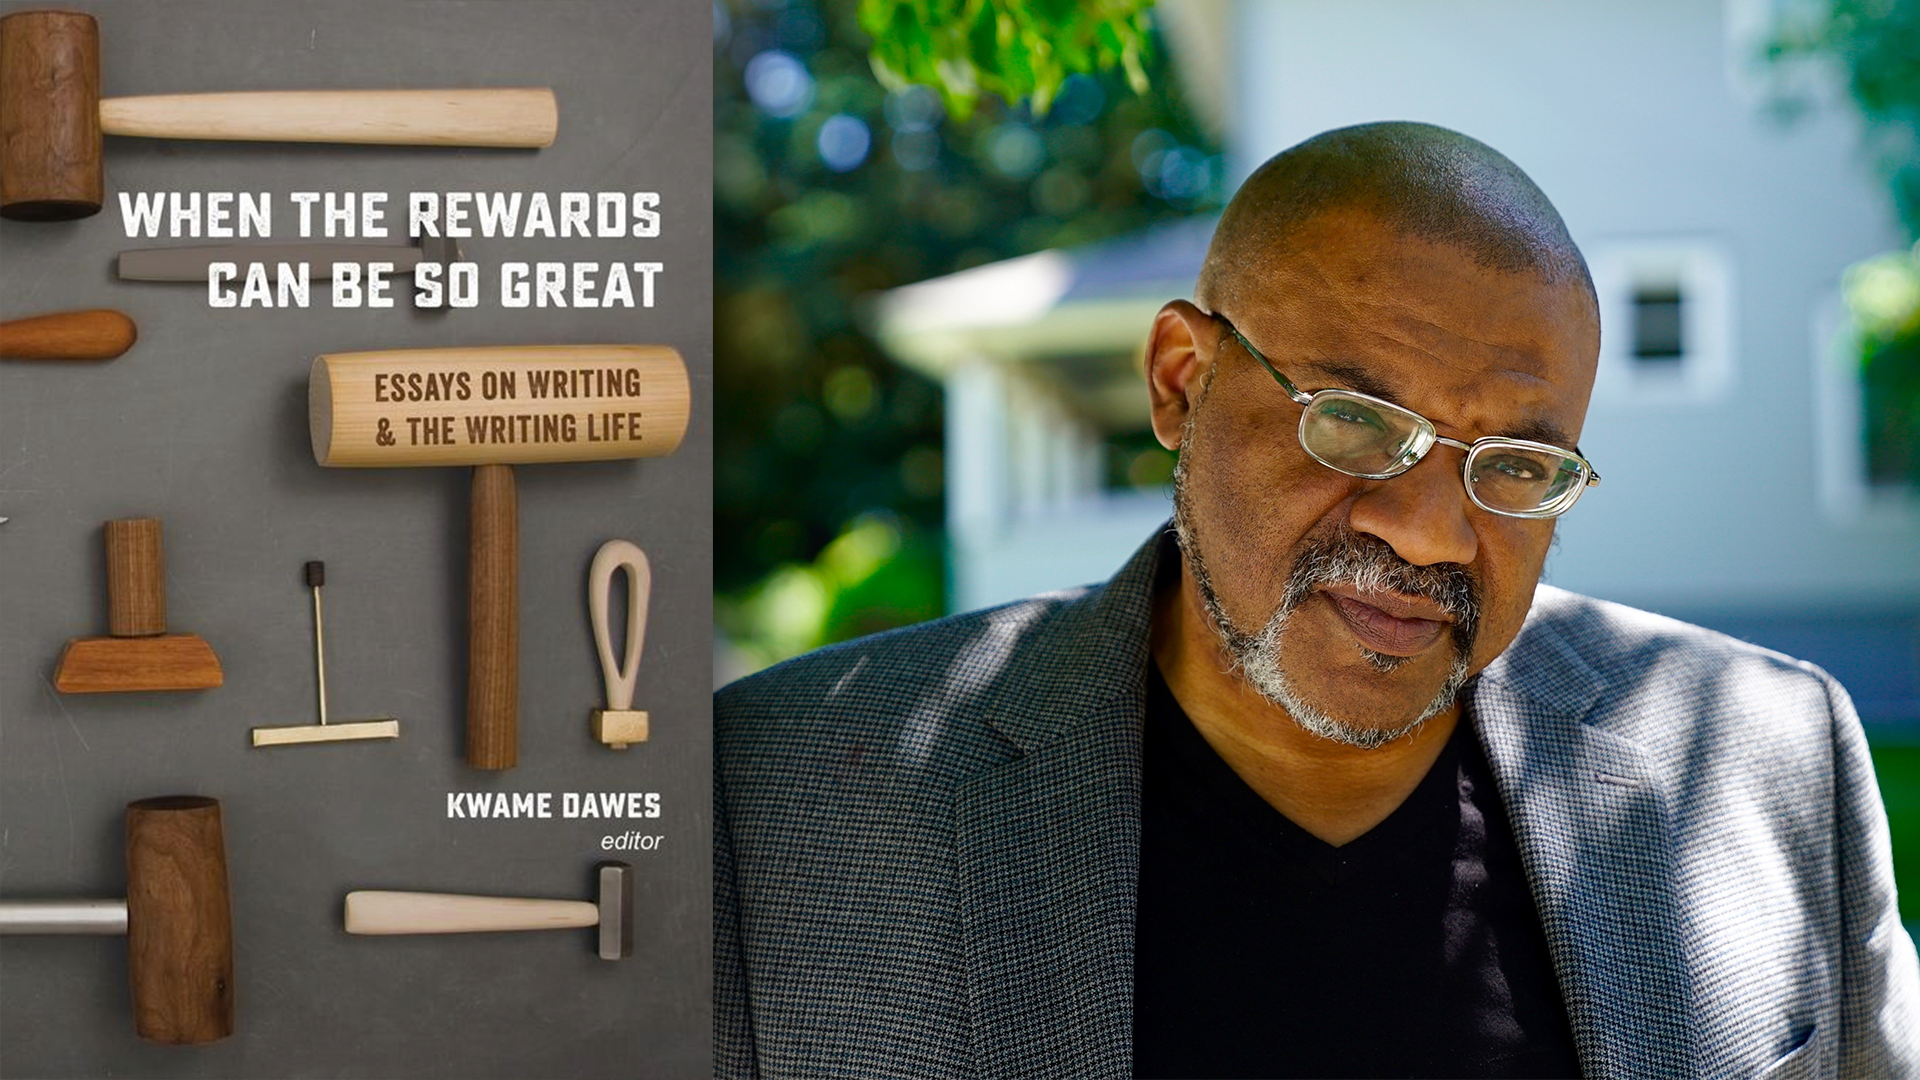 Kwame Dawes and the cover of WHEN THE REWARDS CAN BE SO GREAT